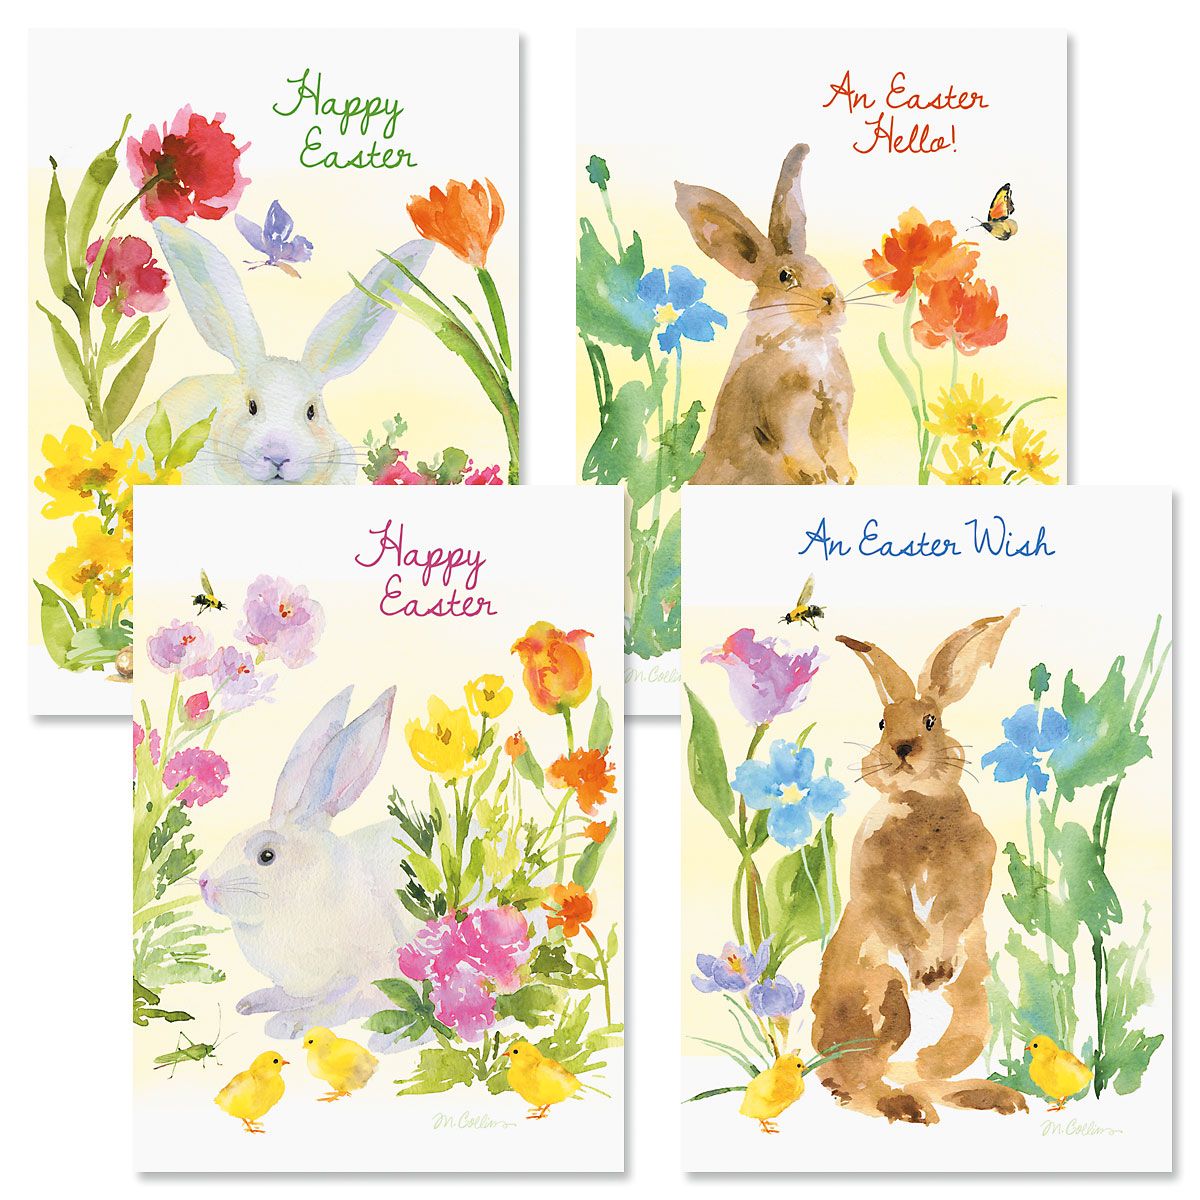 Easter Bunnies Cards | Colorful Images